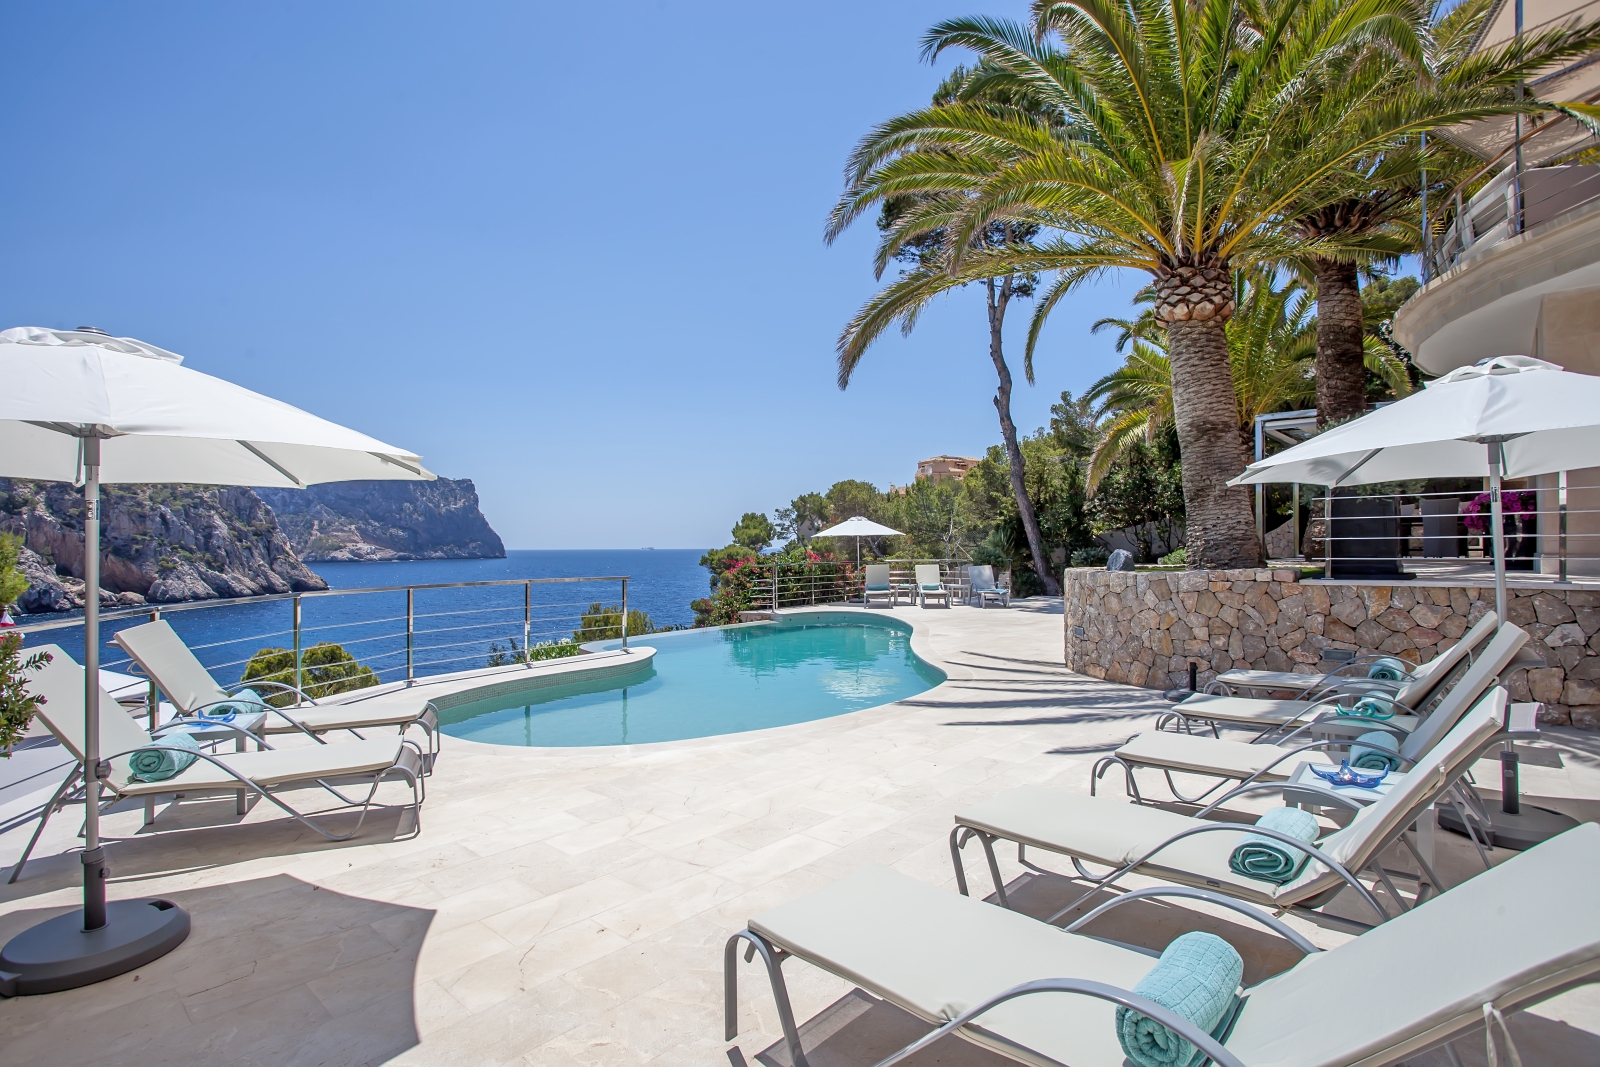 Pool and pool area with sea view, sun loungers, umbrellas, fresh towels and palm tree at Vista Marmessen in Mallorca, Spain